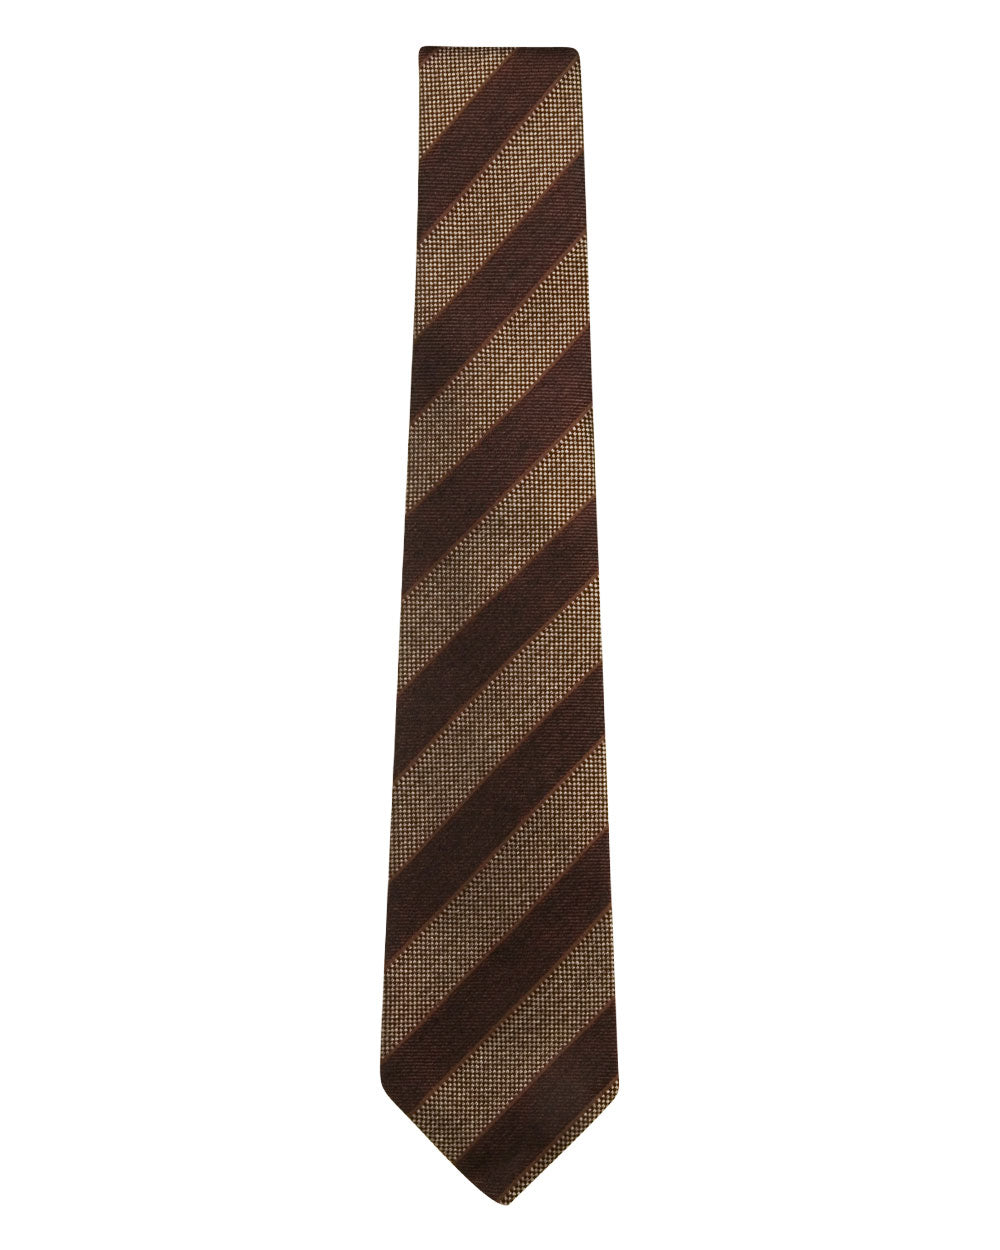 Brown and Beige Striped Tie